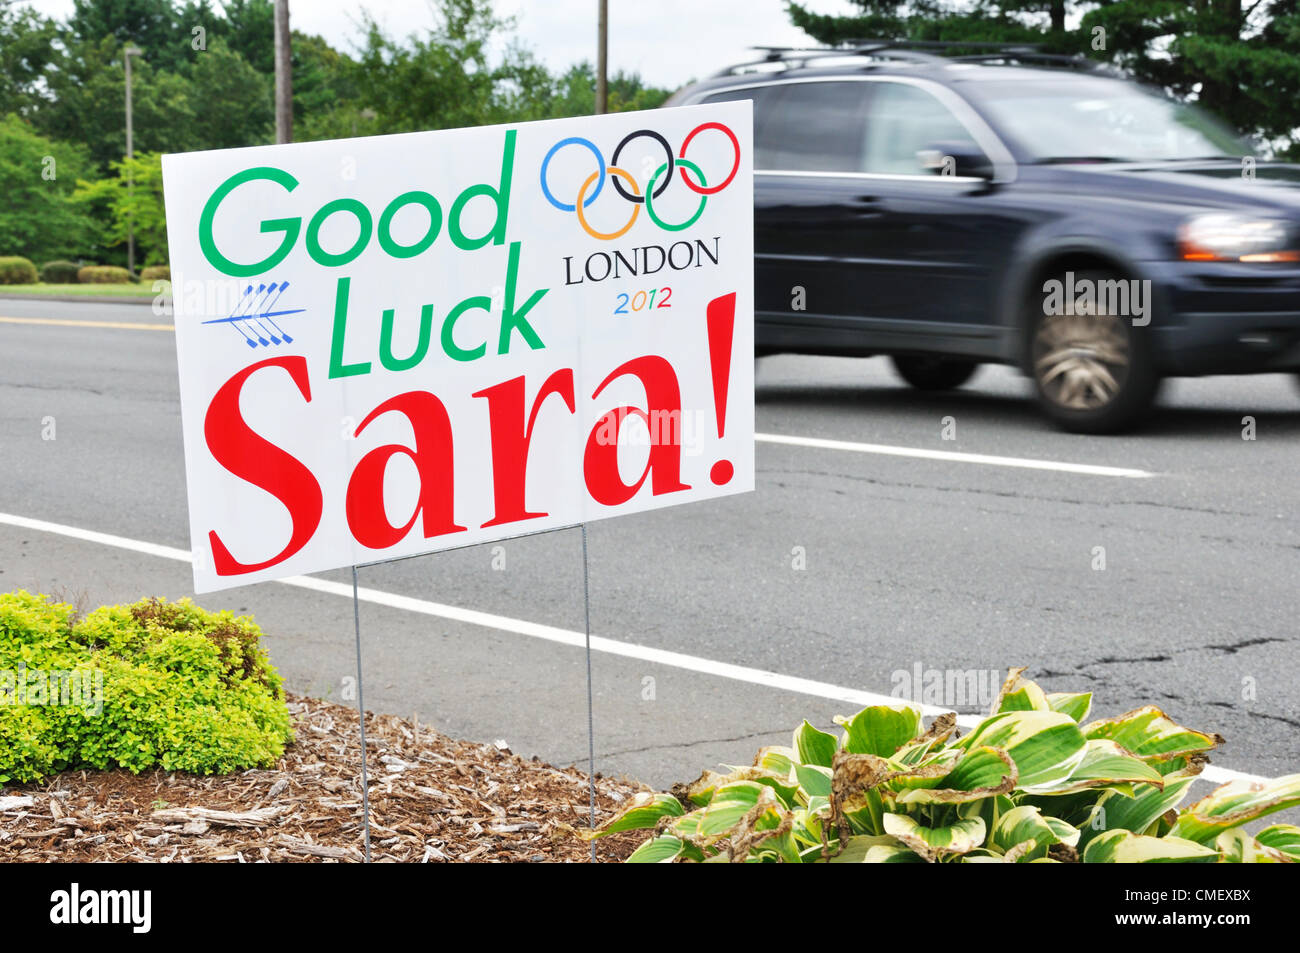 Roadside support poster for Connecticut Rower Sara Hendershot who qualified for Final in Summer Olympics. Avon, Connecticut, USA Stock Photo